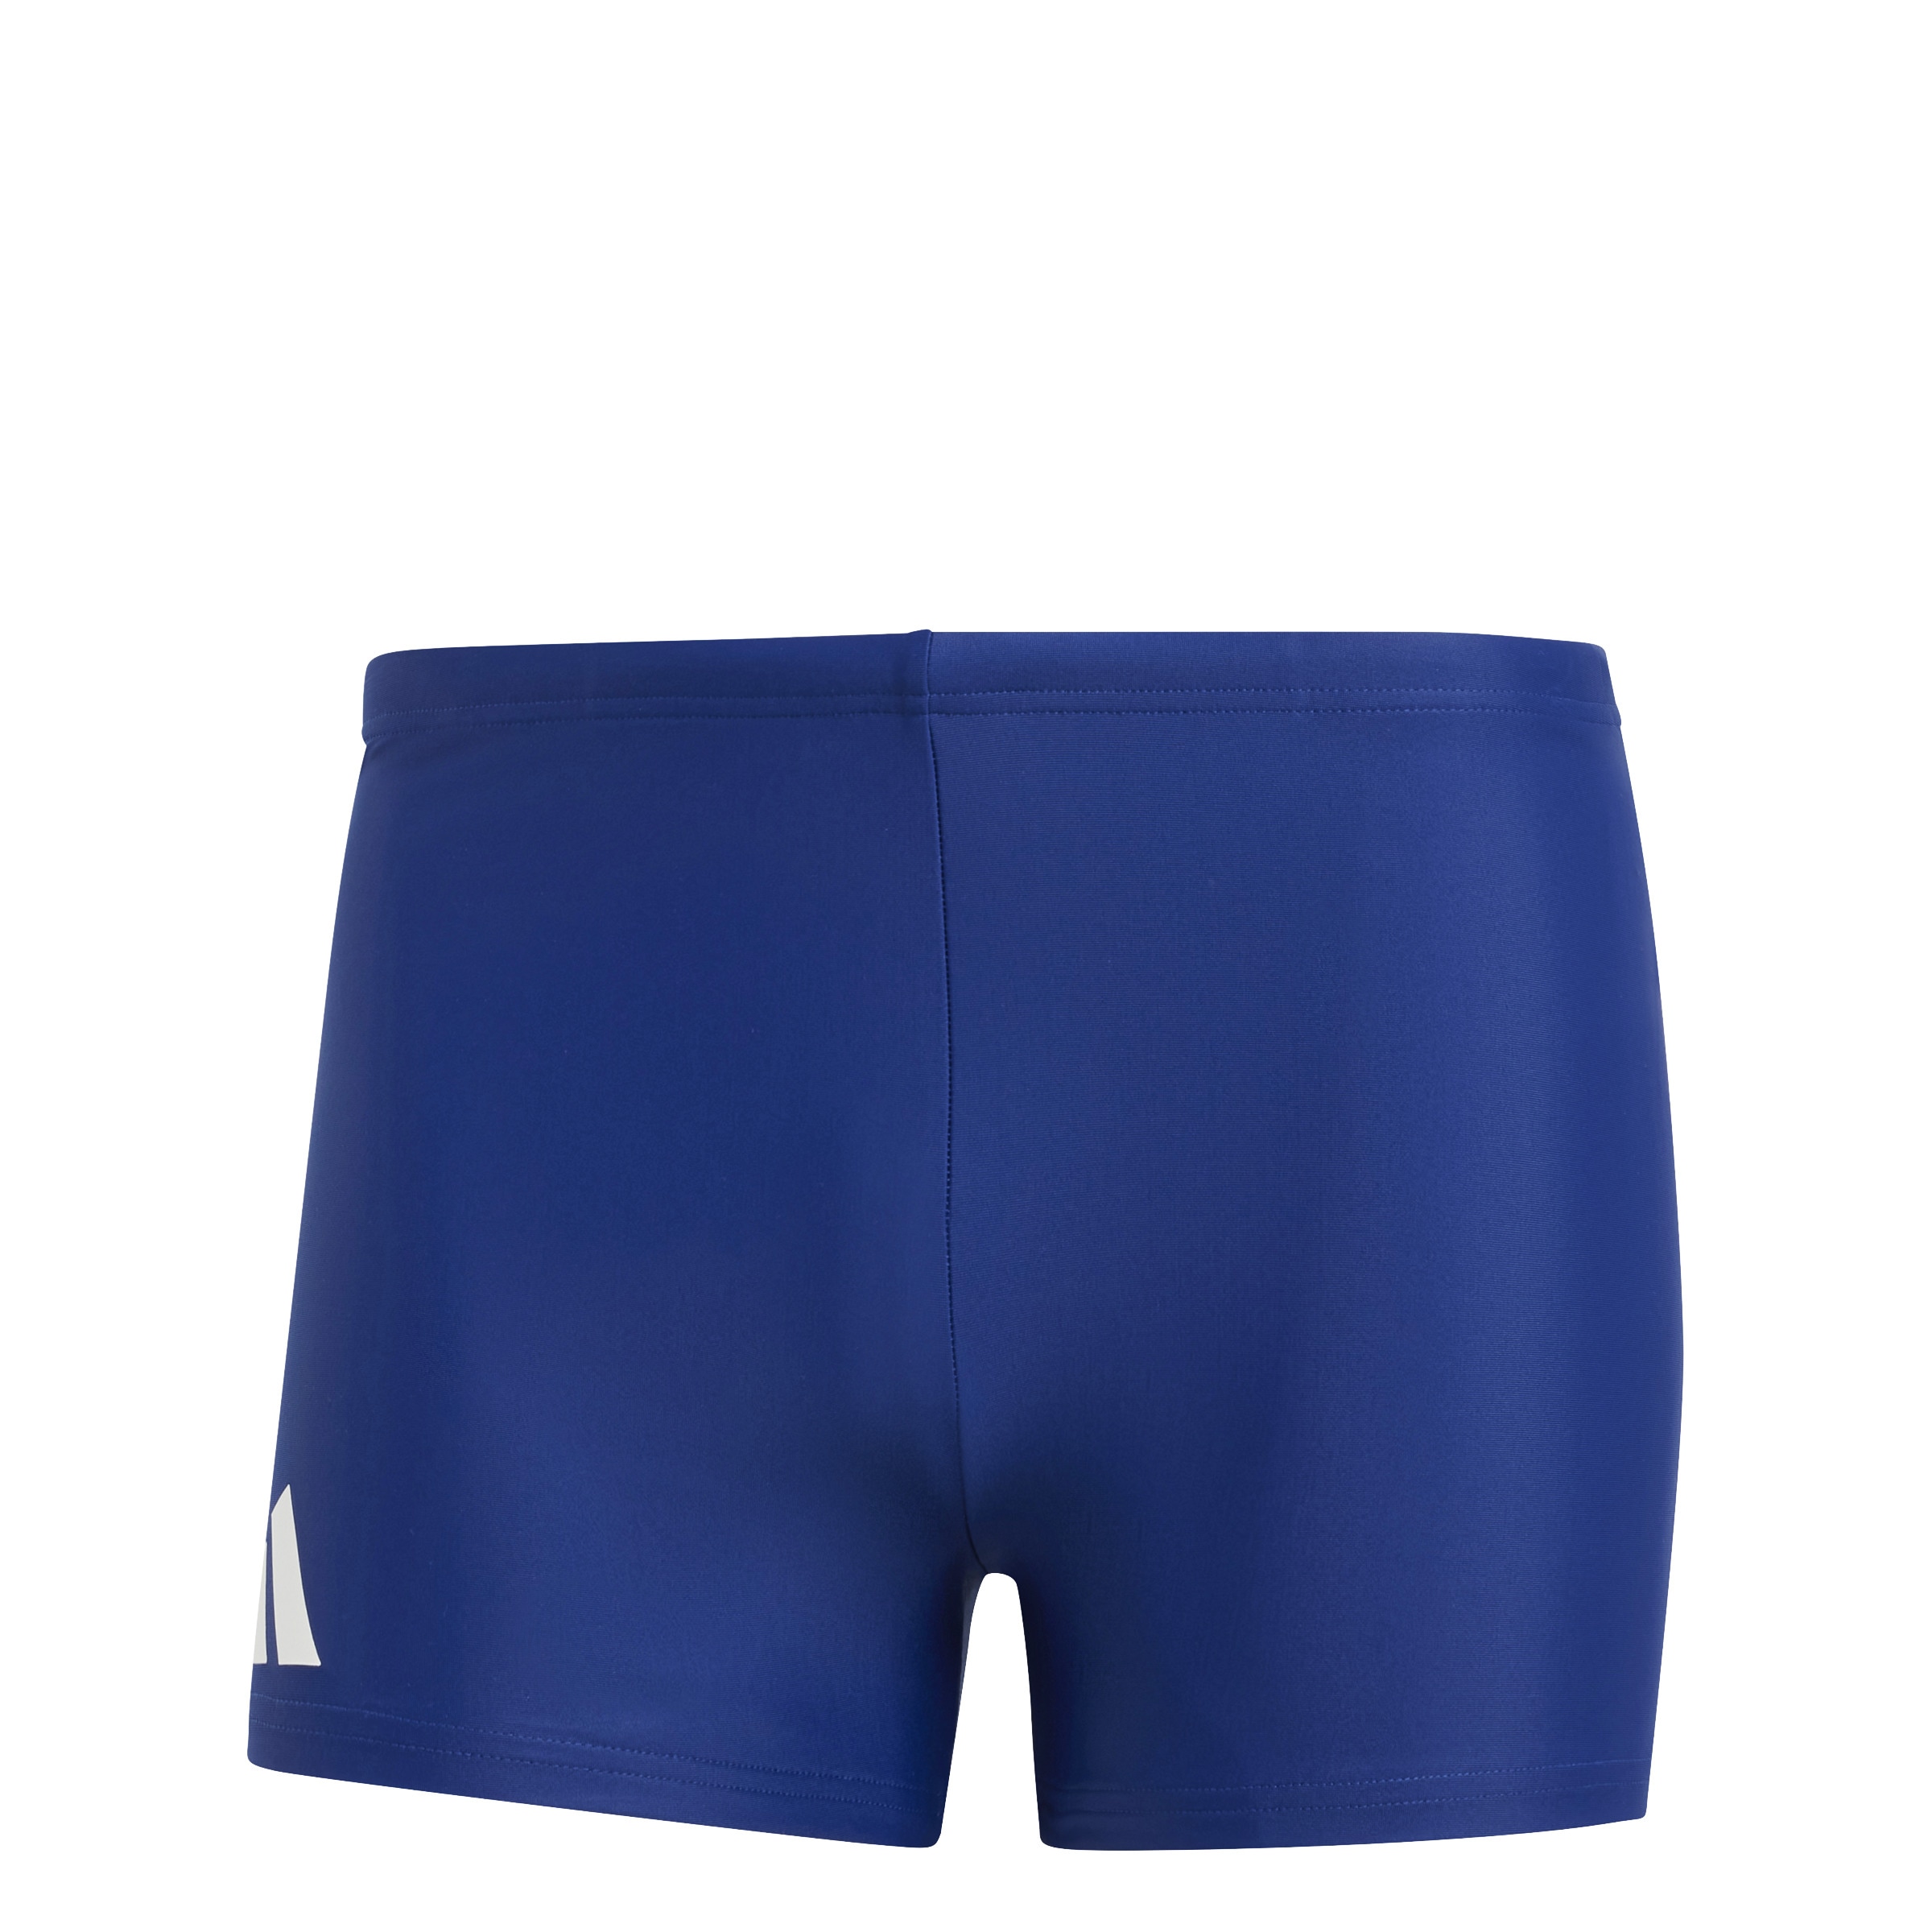 adidas Performance Badehose »SOLID BOXER-«, (1 St.)